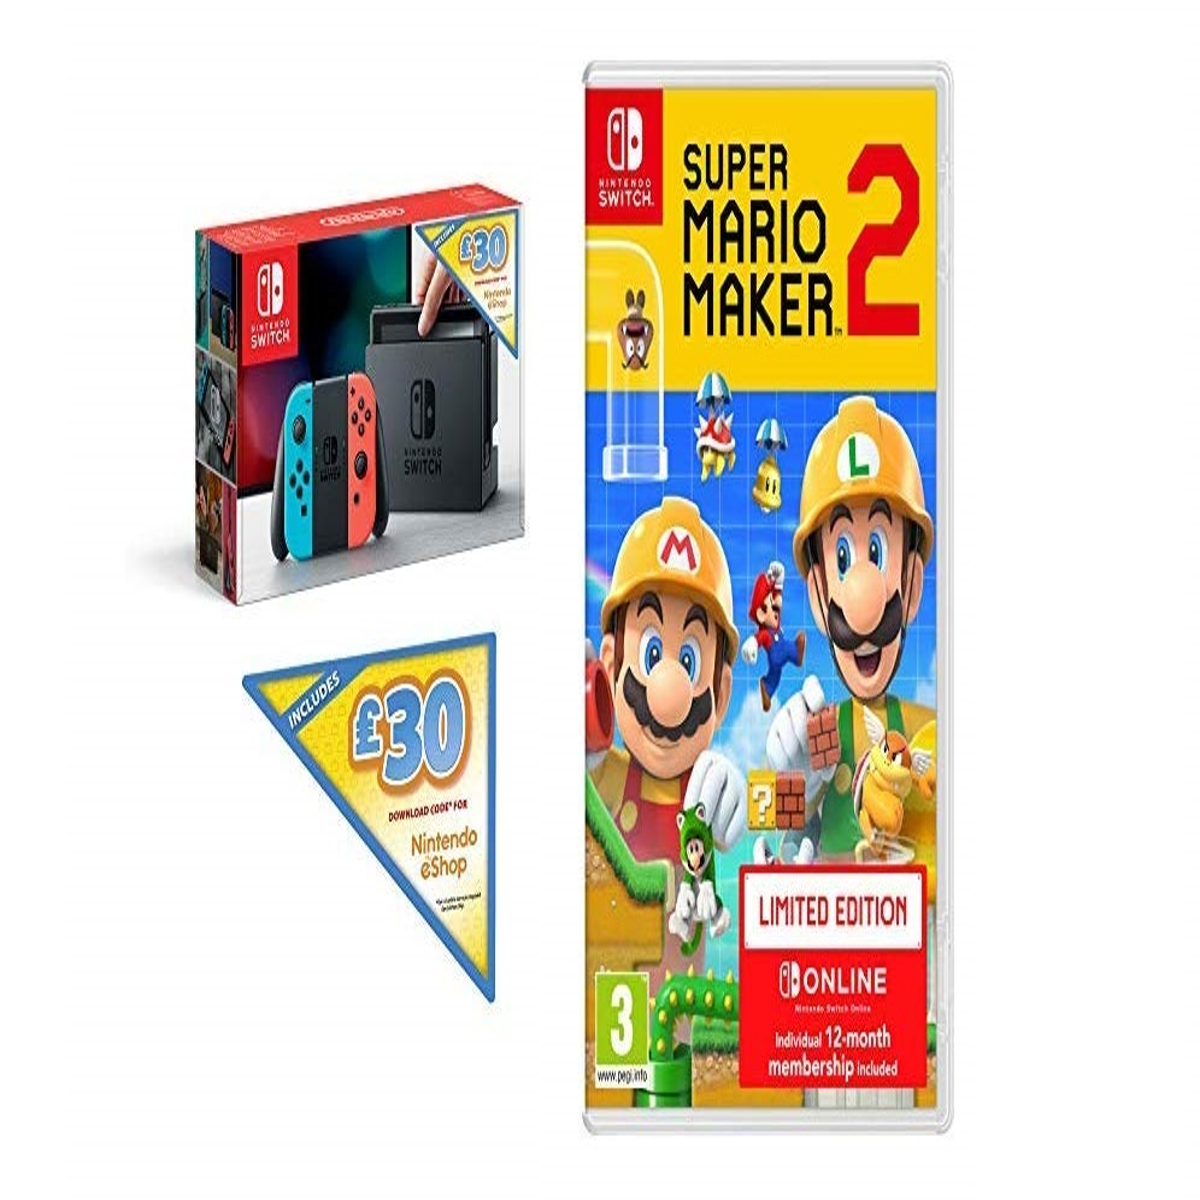 This Nintendo deal £300 Switch eShop just months\' for 12 Mario £30 Online 2, includes voucher Maker Switch a and